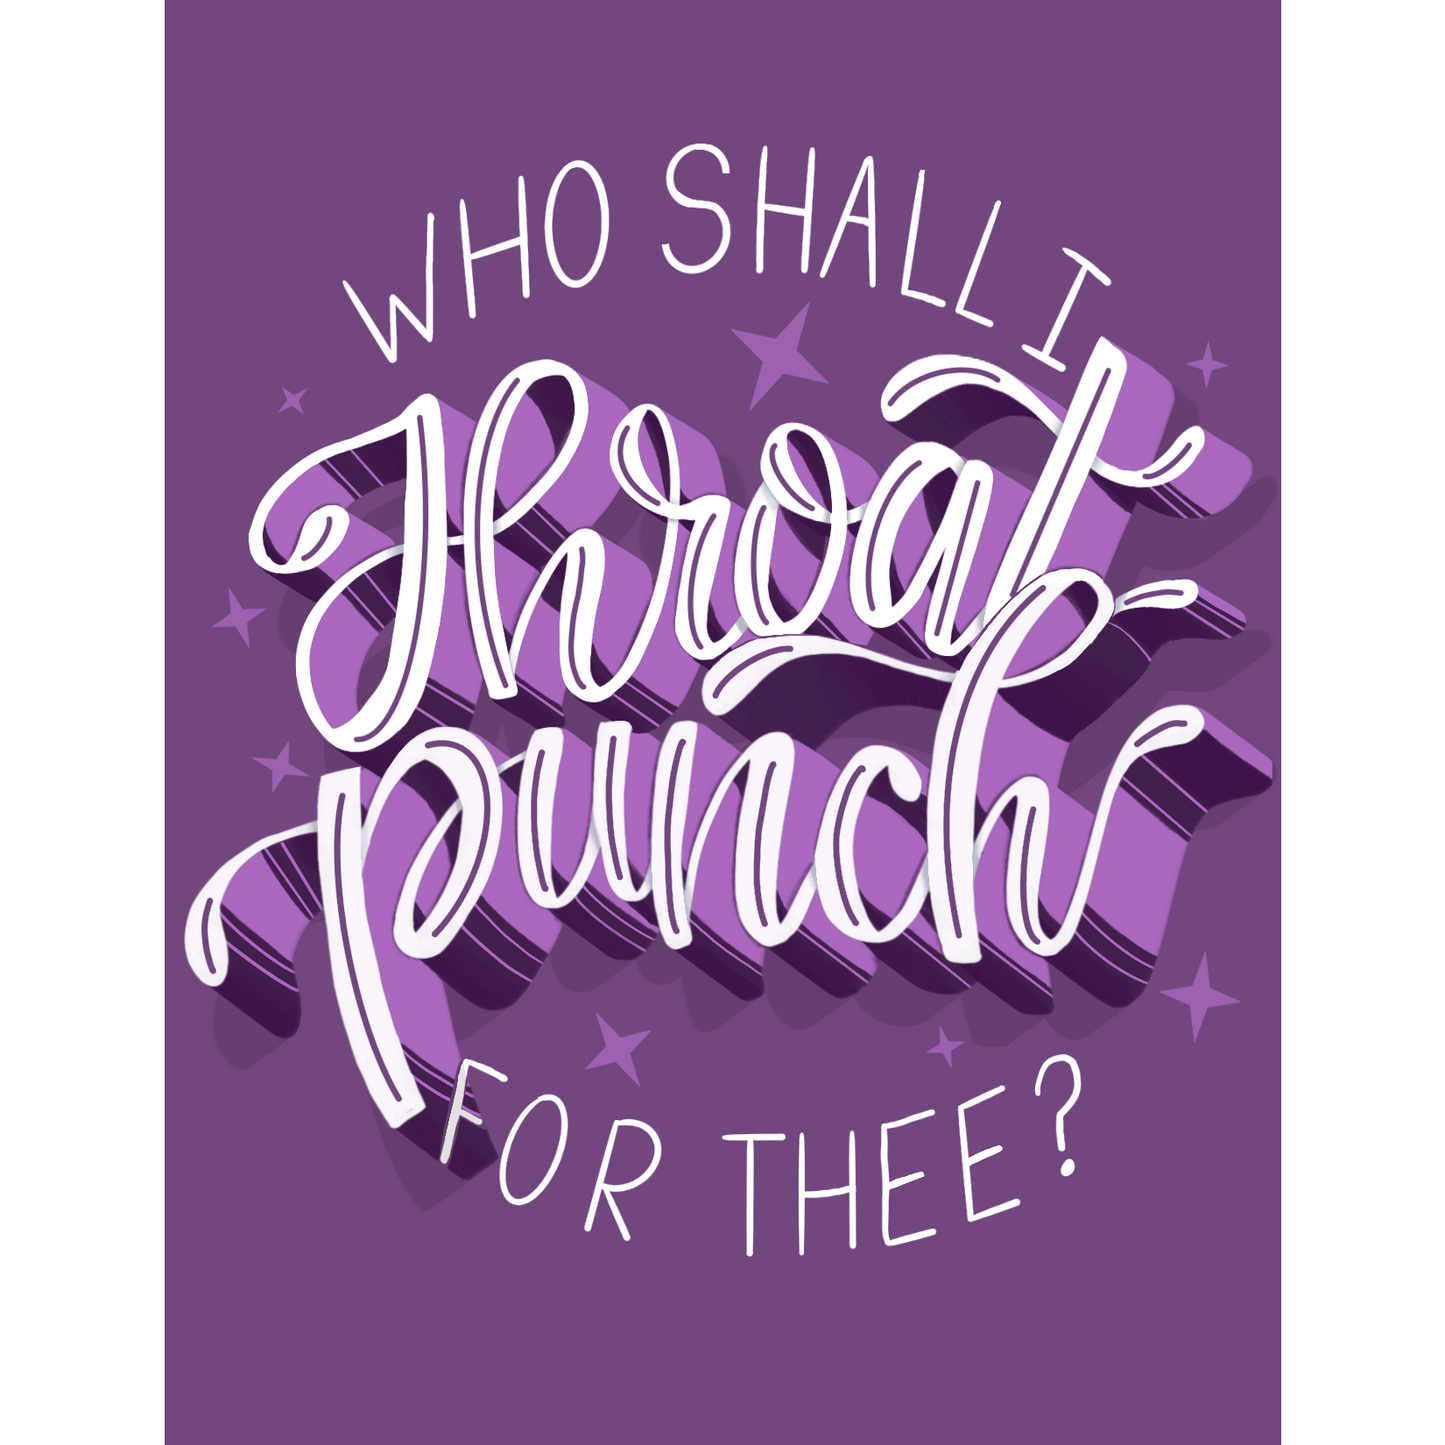 Who Shall I Throat Punch for Thee? -  Empathy Card